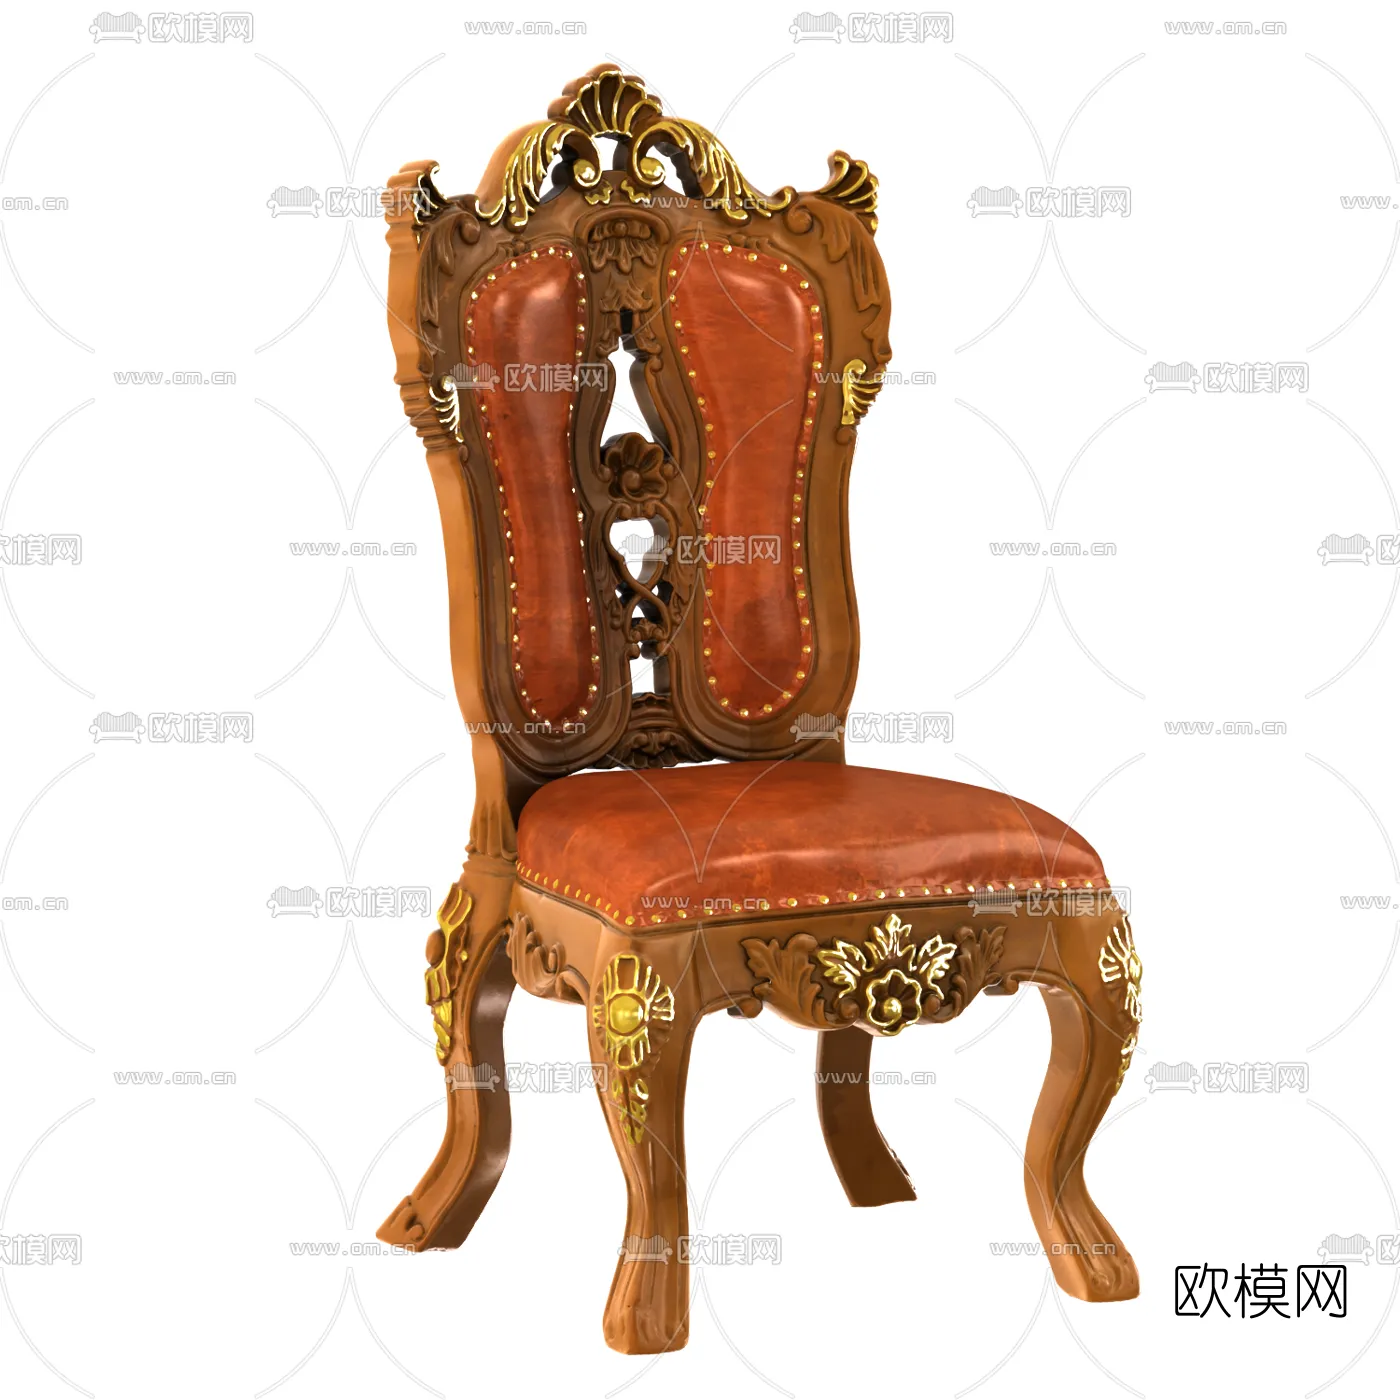 CLASSIC – DINING CHAIR 3DMODELS – 005